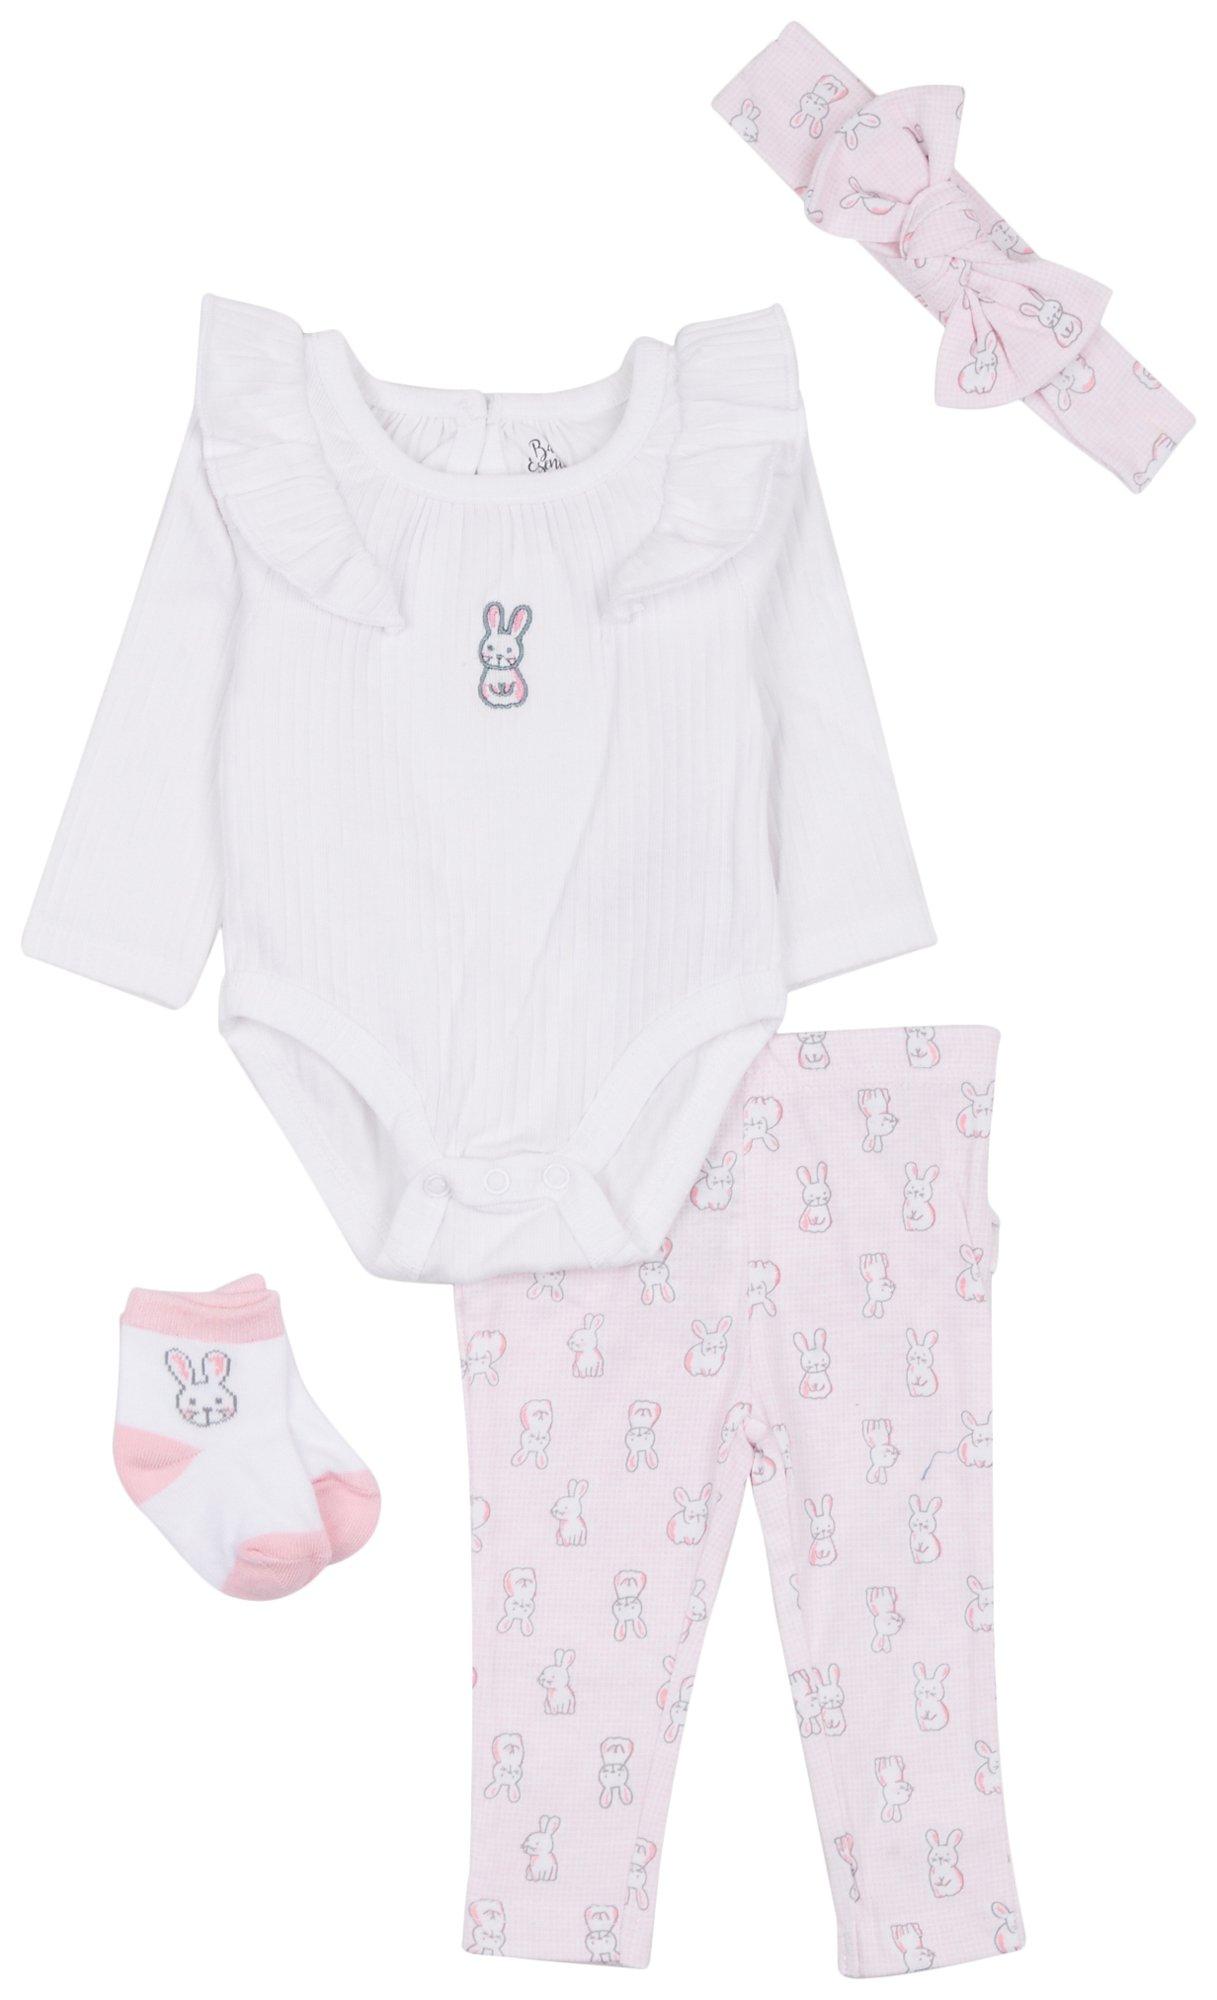 Baby Girls 4-pc. Easter Bunny Creeper Set